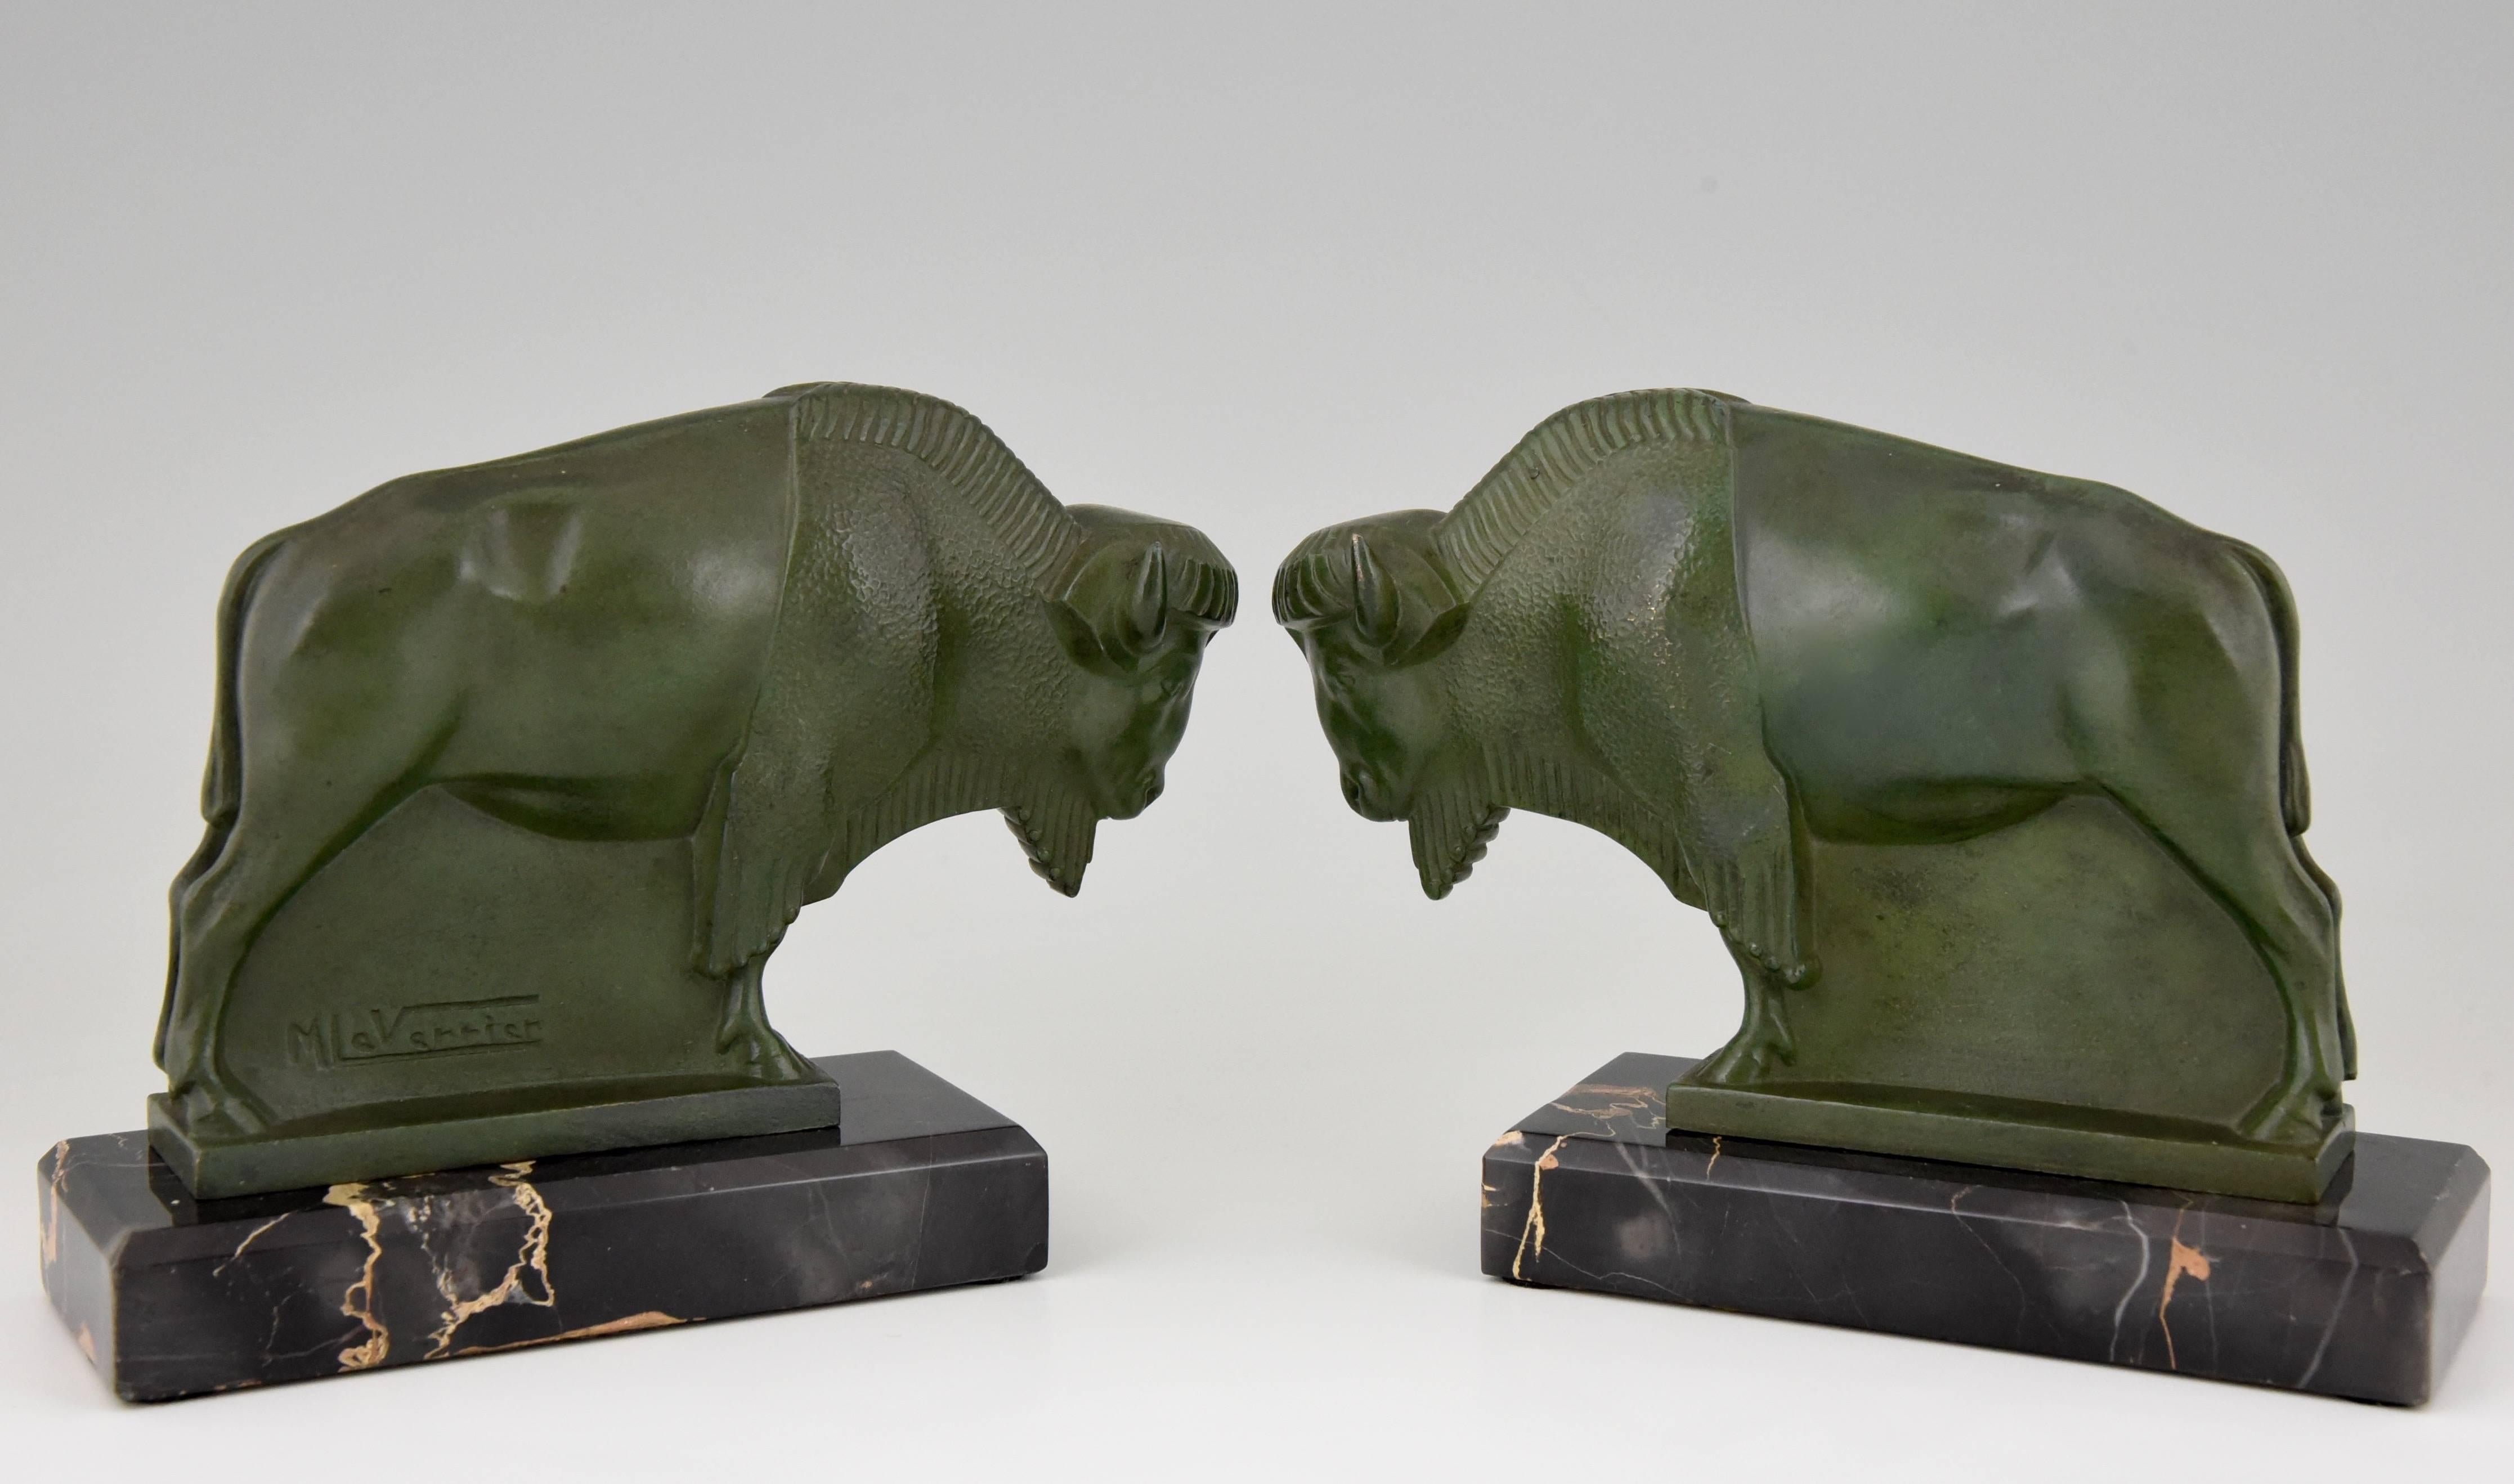 Art Deco bison bookends

Artist/Maker:
Max Le Verrier. 

Signature/Marks: 
M. Le Verrier. 

Style:
Art Deco.

Date:
1930.

Material: 
Green patinated metal.
Portor marble bases.

Origin: 
France.

Size of one:
H. 13.5 cm. x L.